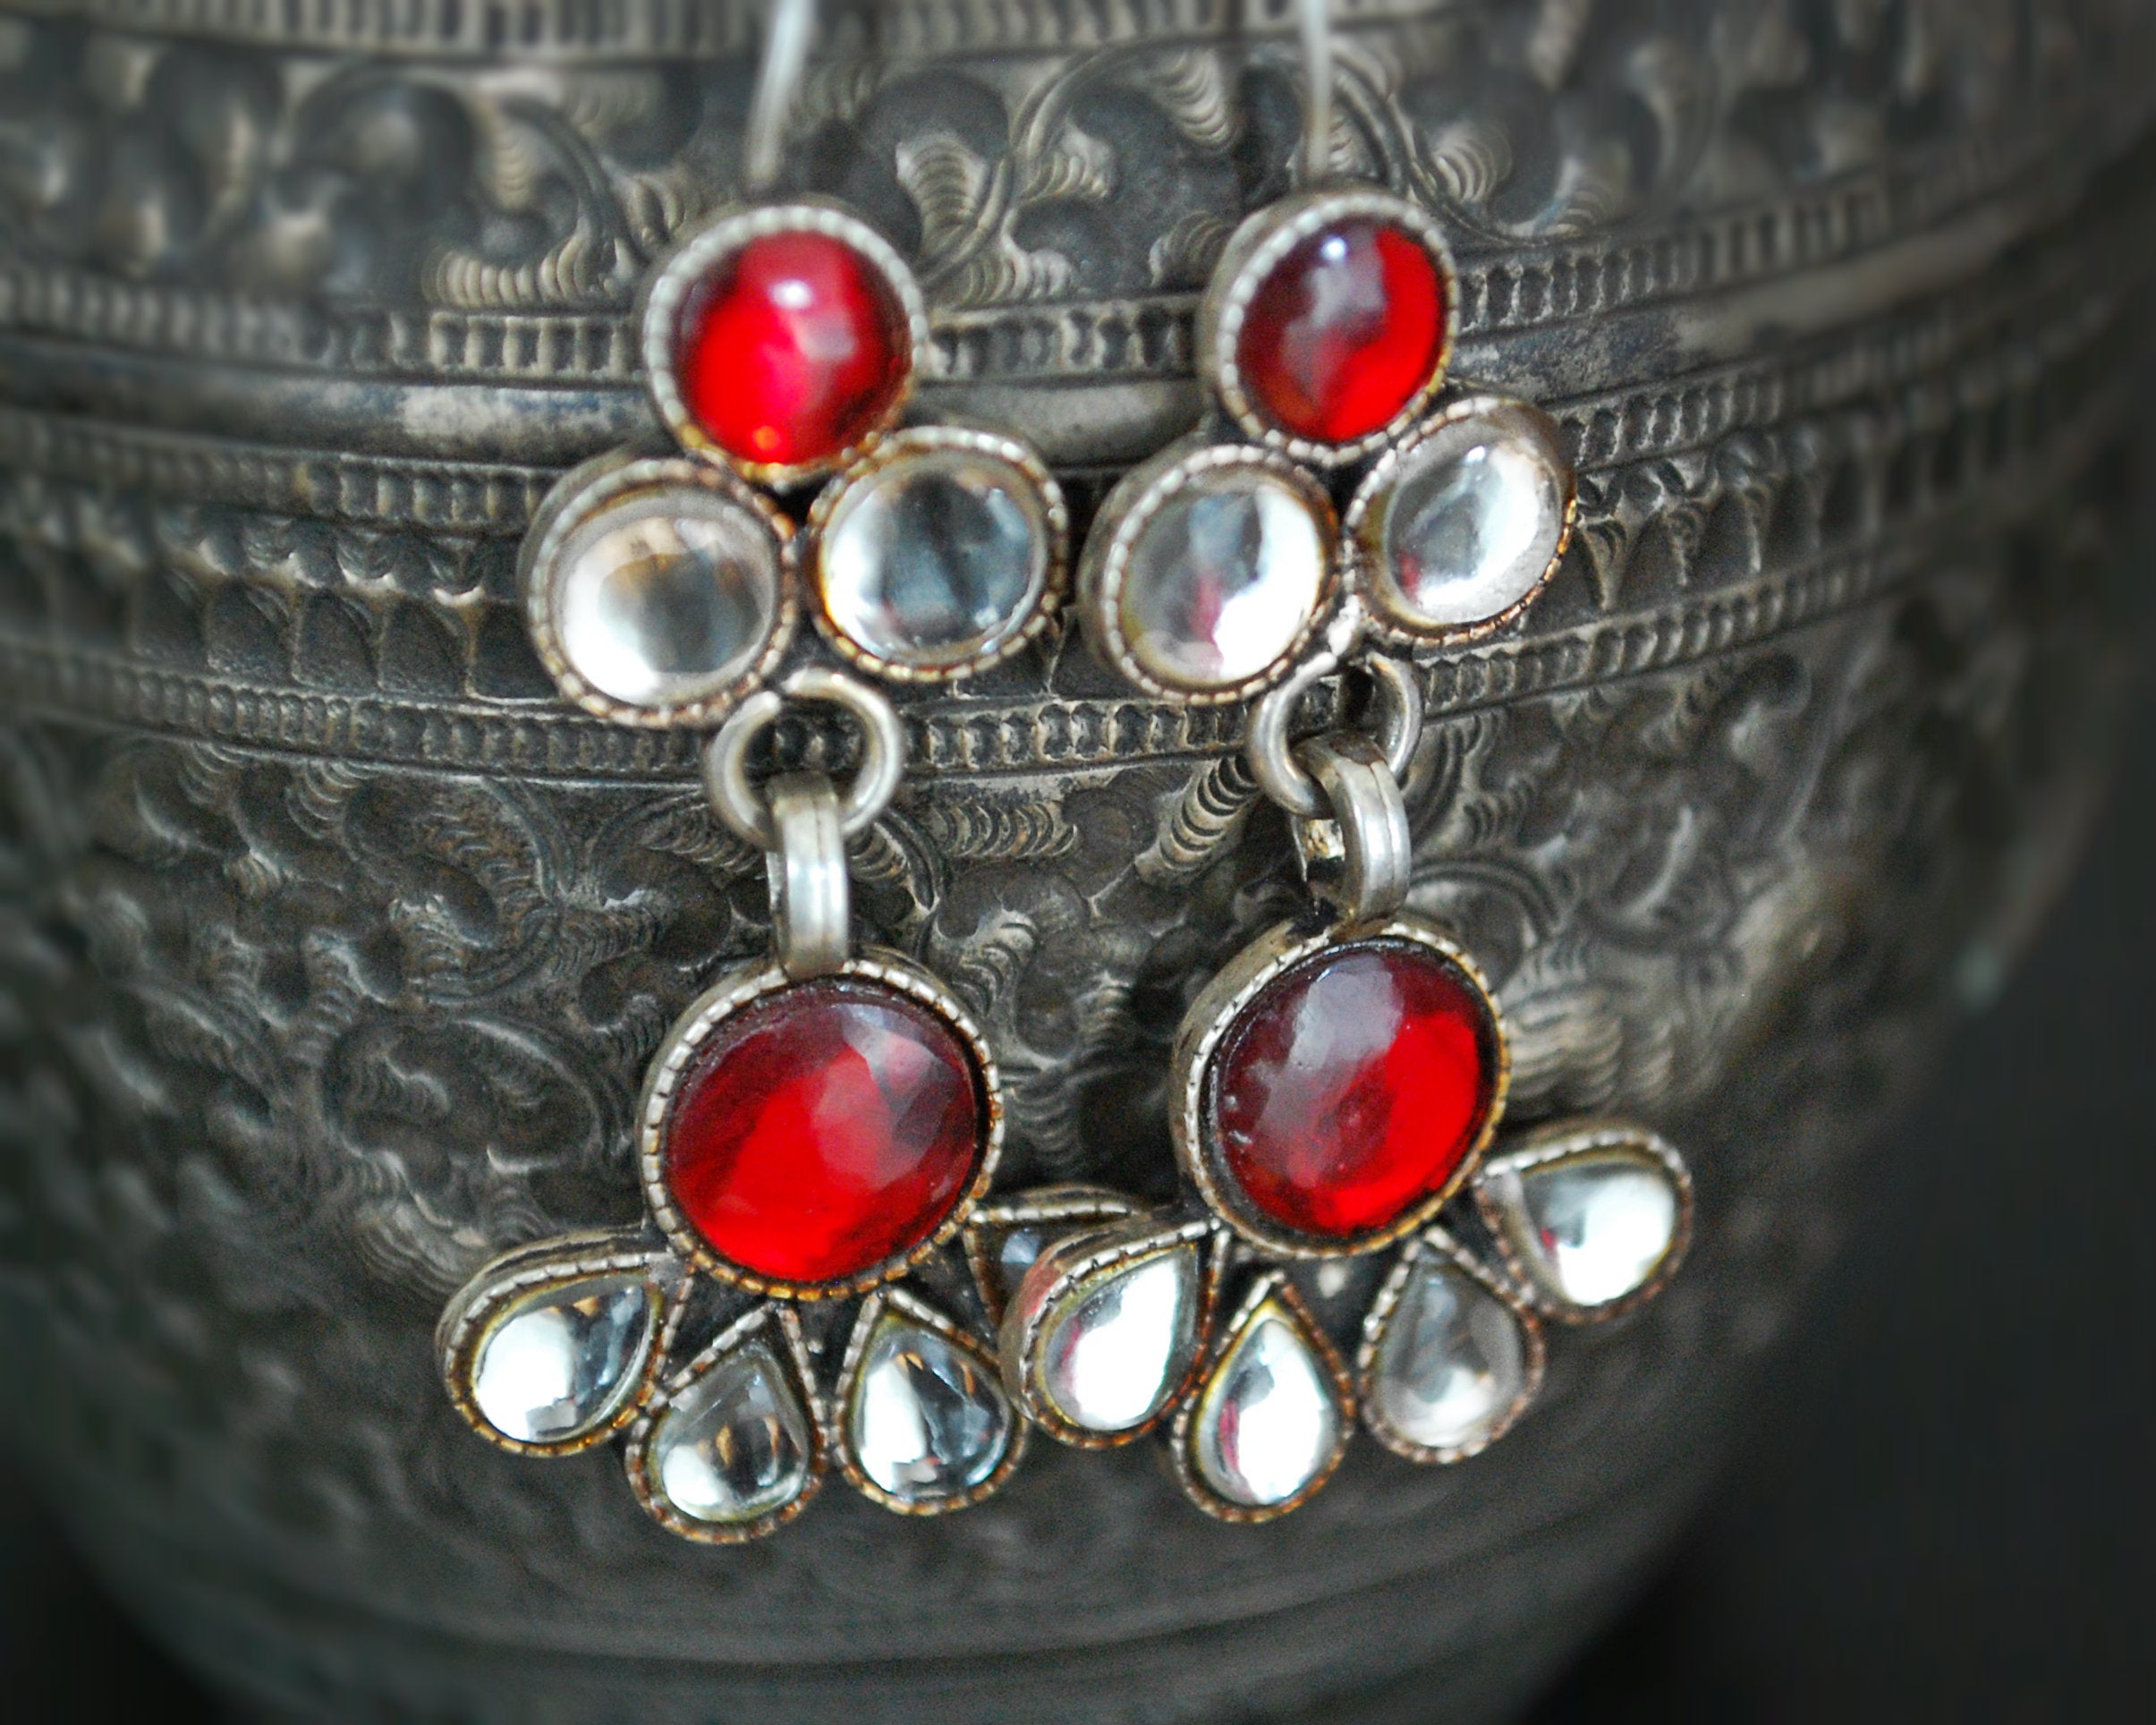 Rajasthani Glass Earrings - Red and White